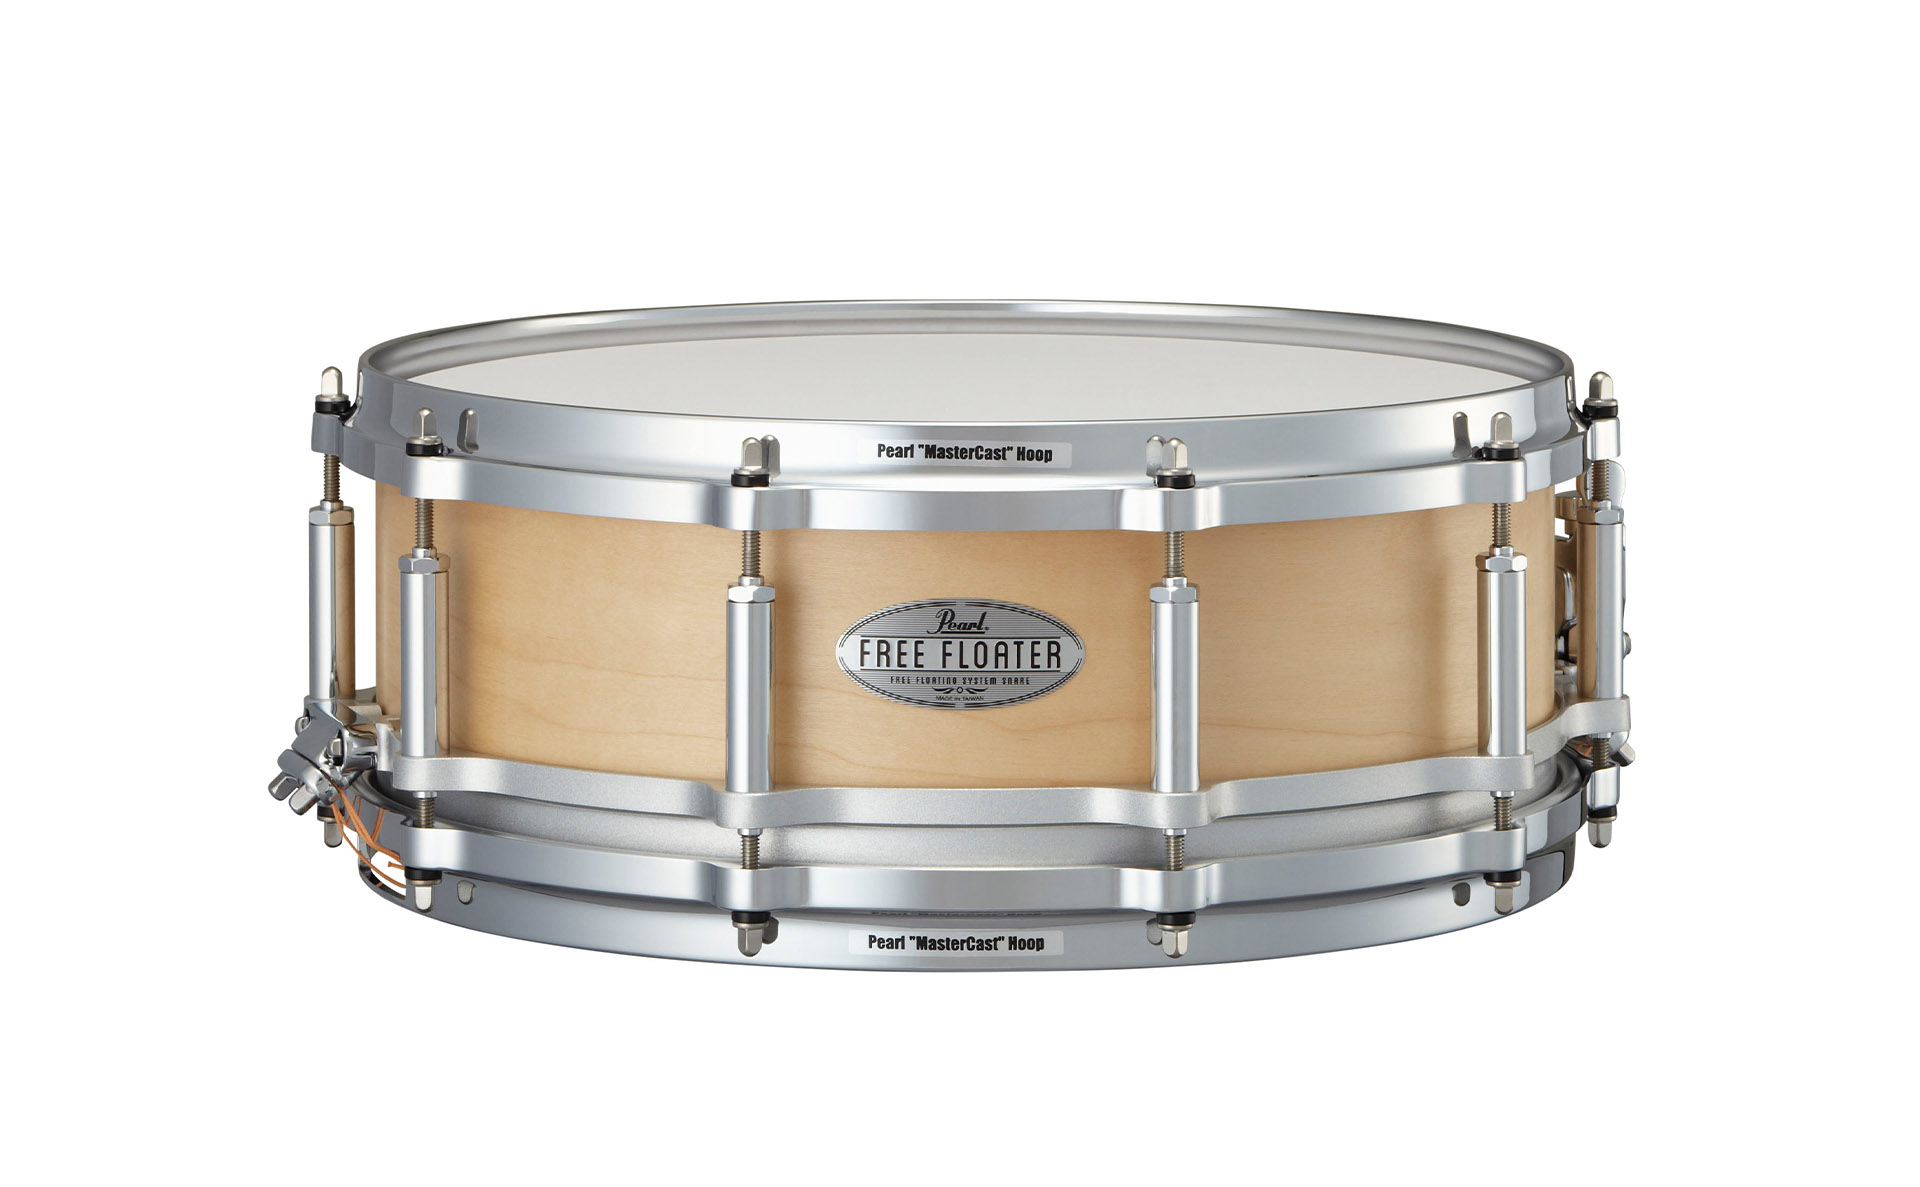 https://pearldrum.com/sites/default/files/image_folder/PRODUCTS/OTHER/PRODUCT_THUMBNAIL%235/SNARE/FTMM1450_FREE%20FLOATING%20MAPLE_321_Satin%20Maple_IMG_5thumbnail_FREE%20FLOATING%20MAPLE.jpg